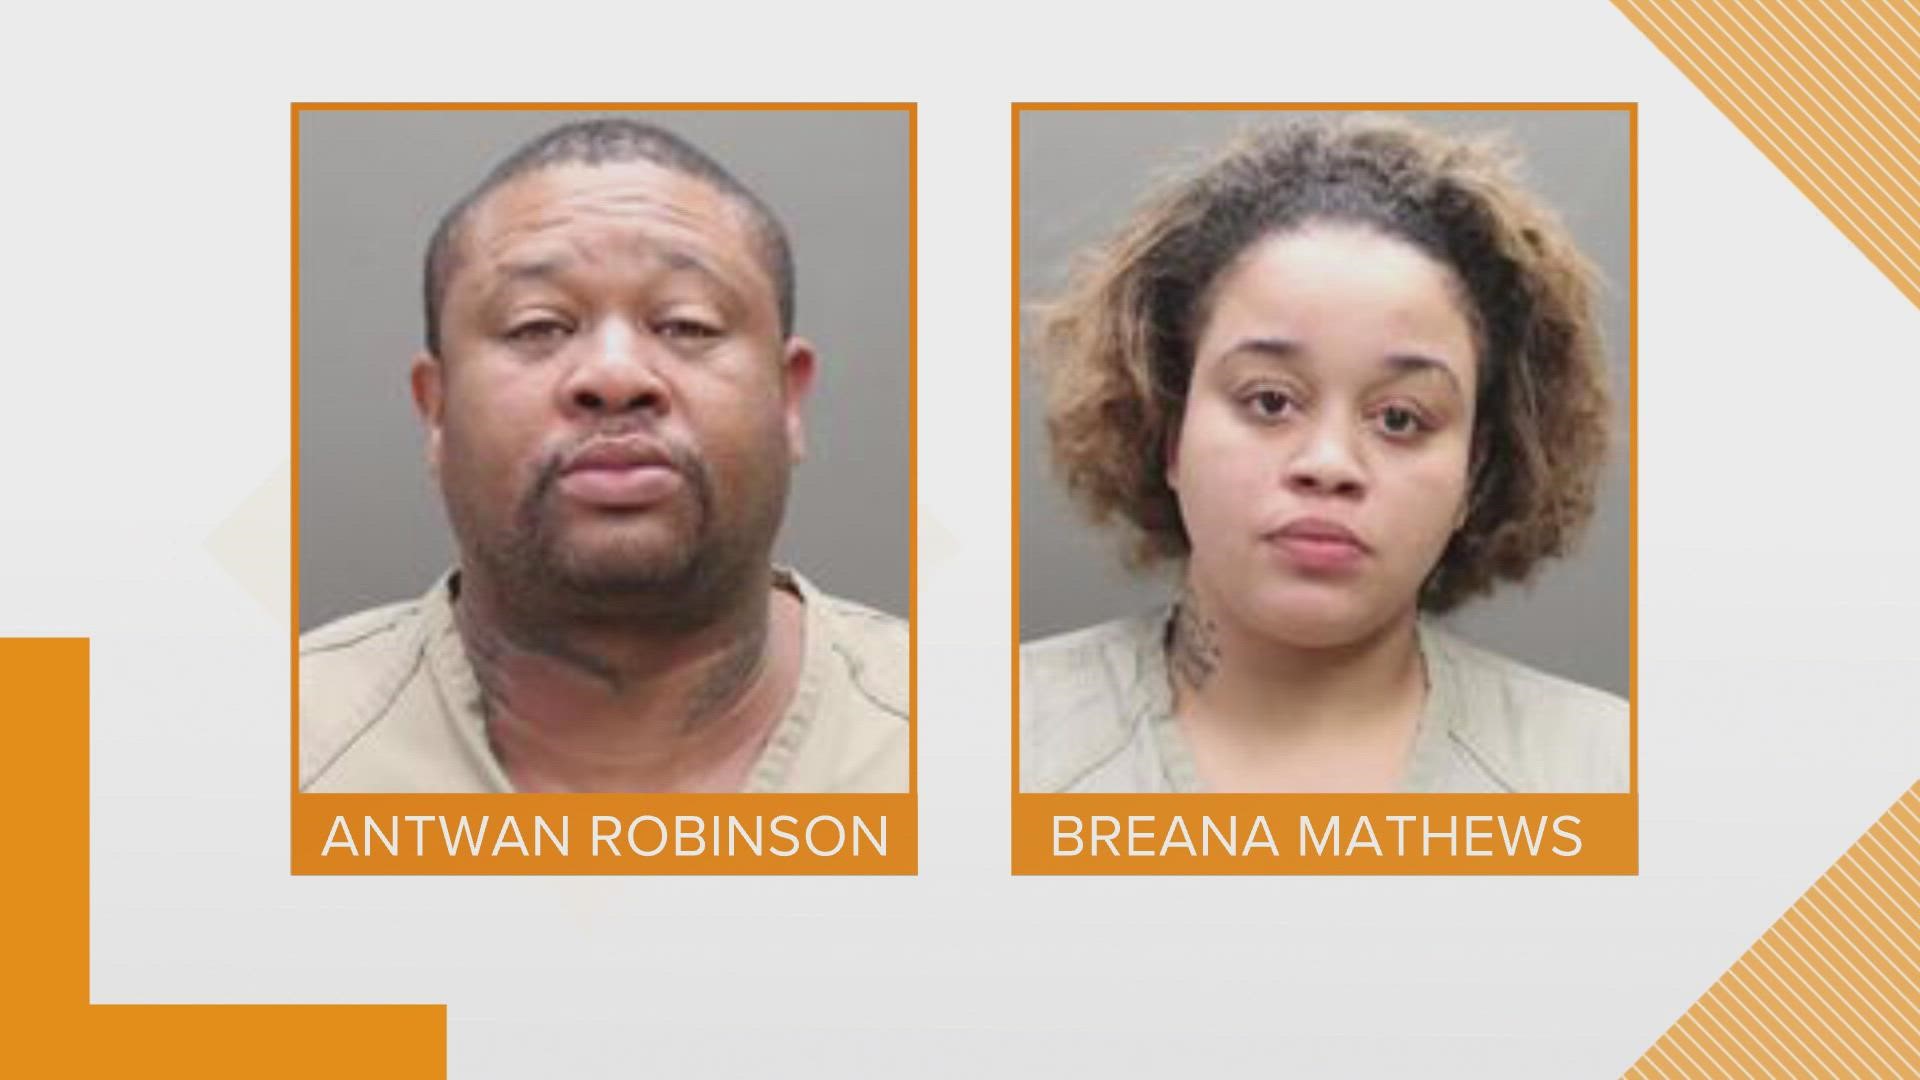 Police arrested Antwan Robinson and Breana Mathews on Tuesday in connection to the fatal shooting of Serenity Robinson.